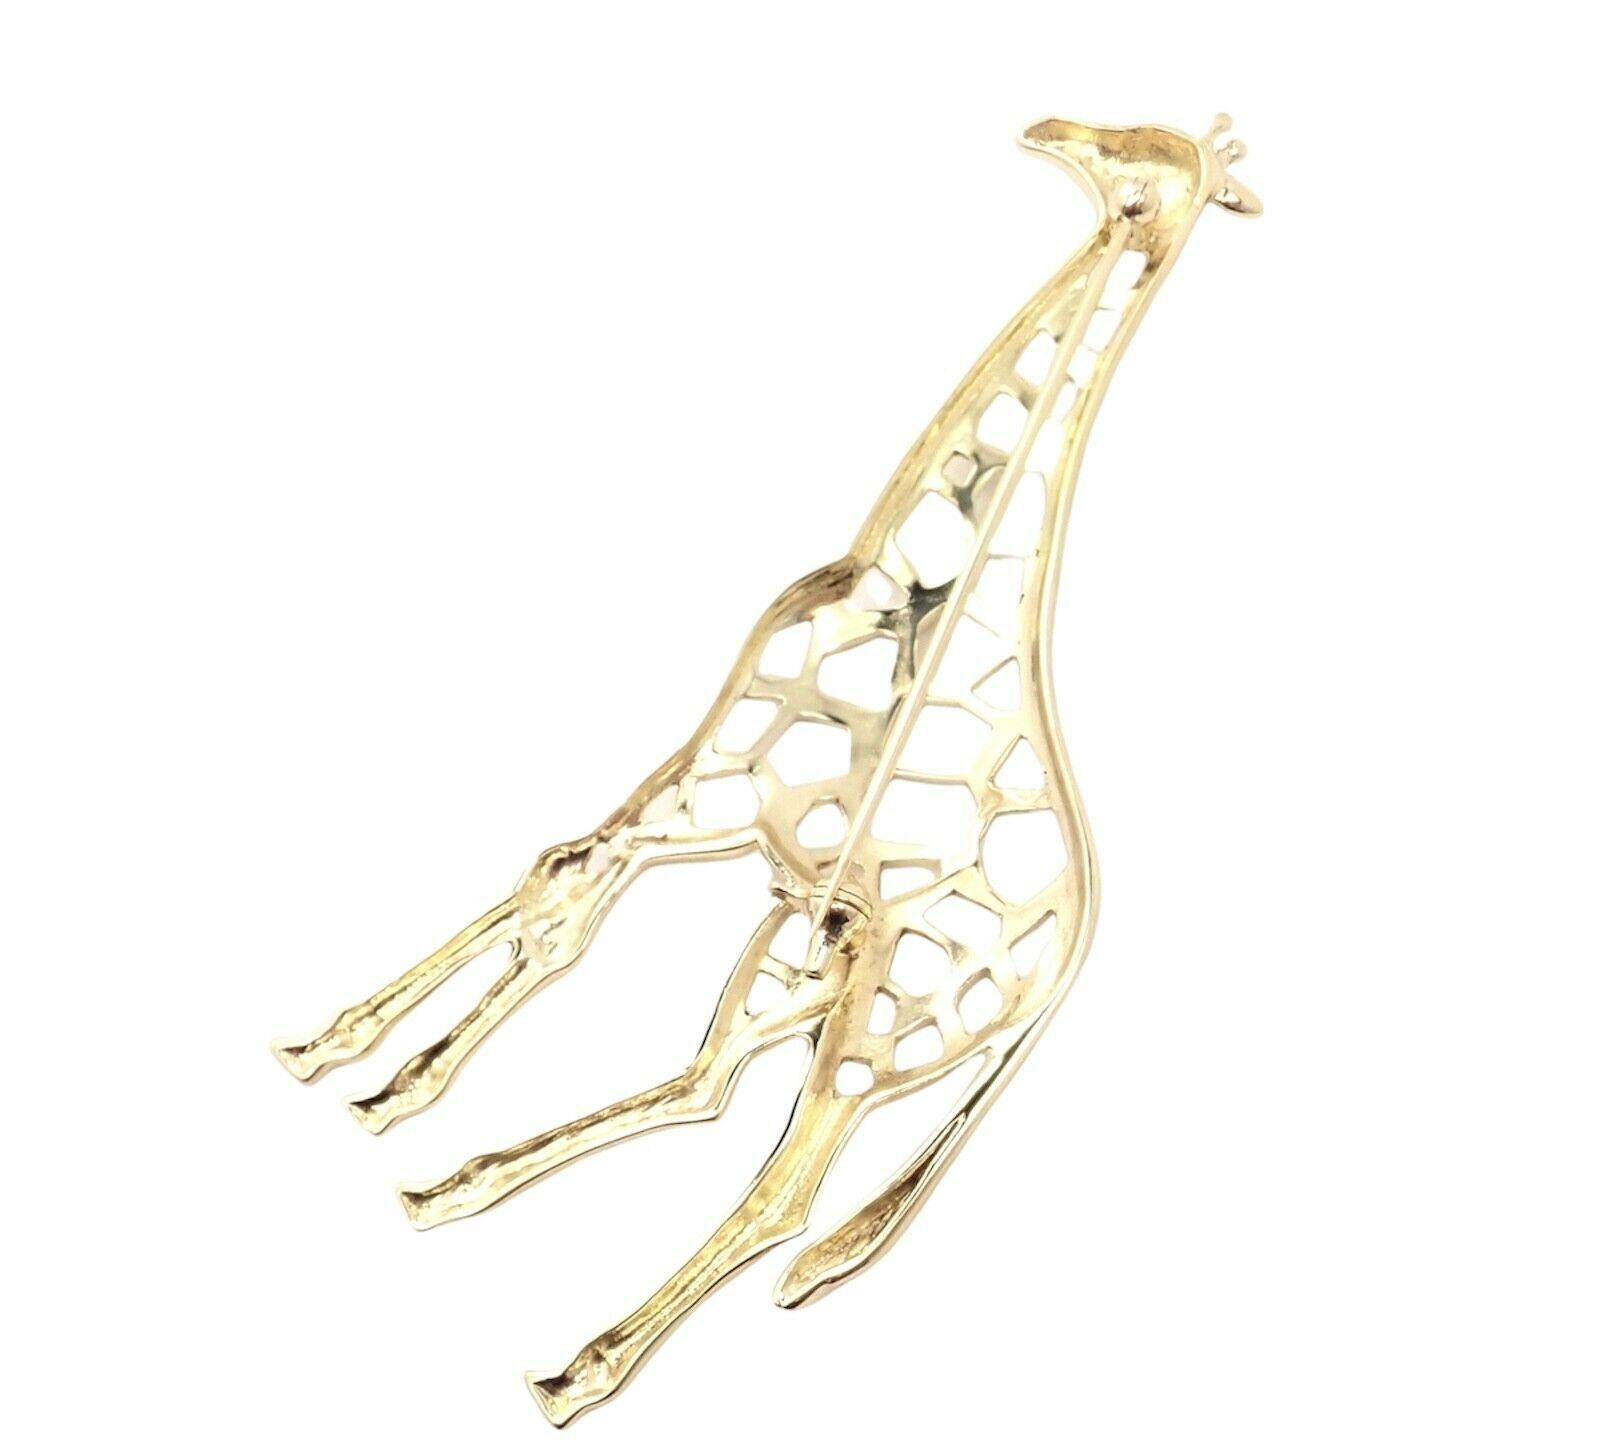 18k Yellow Gold Large Giraffe Pin Brooch by Mikimoto. 
Details: 
Measurements: 26mm x 76.5mm
Weight: 16.5 grams
Stamped Hallmarks: Mikimoto Logo K18
*Free Shipping within the United States*
YOUR PRICE: $4,750
Ti760odad